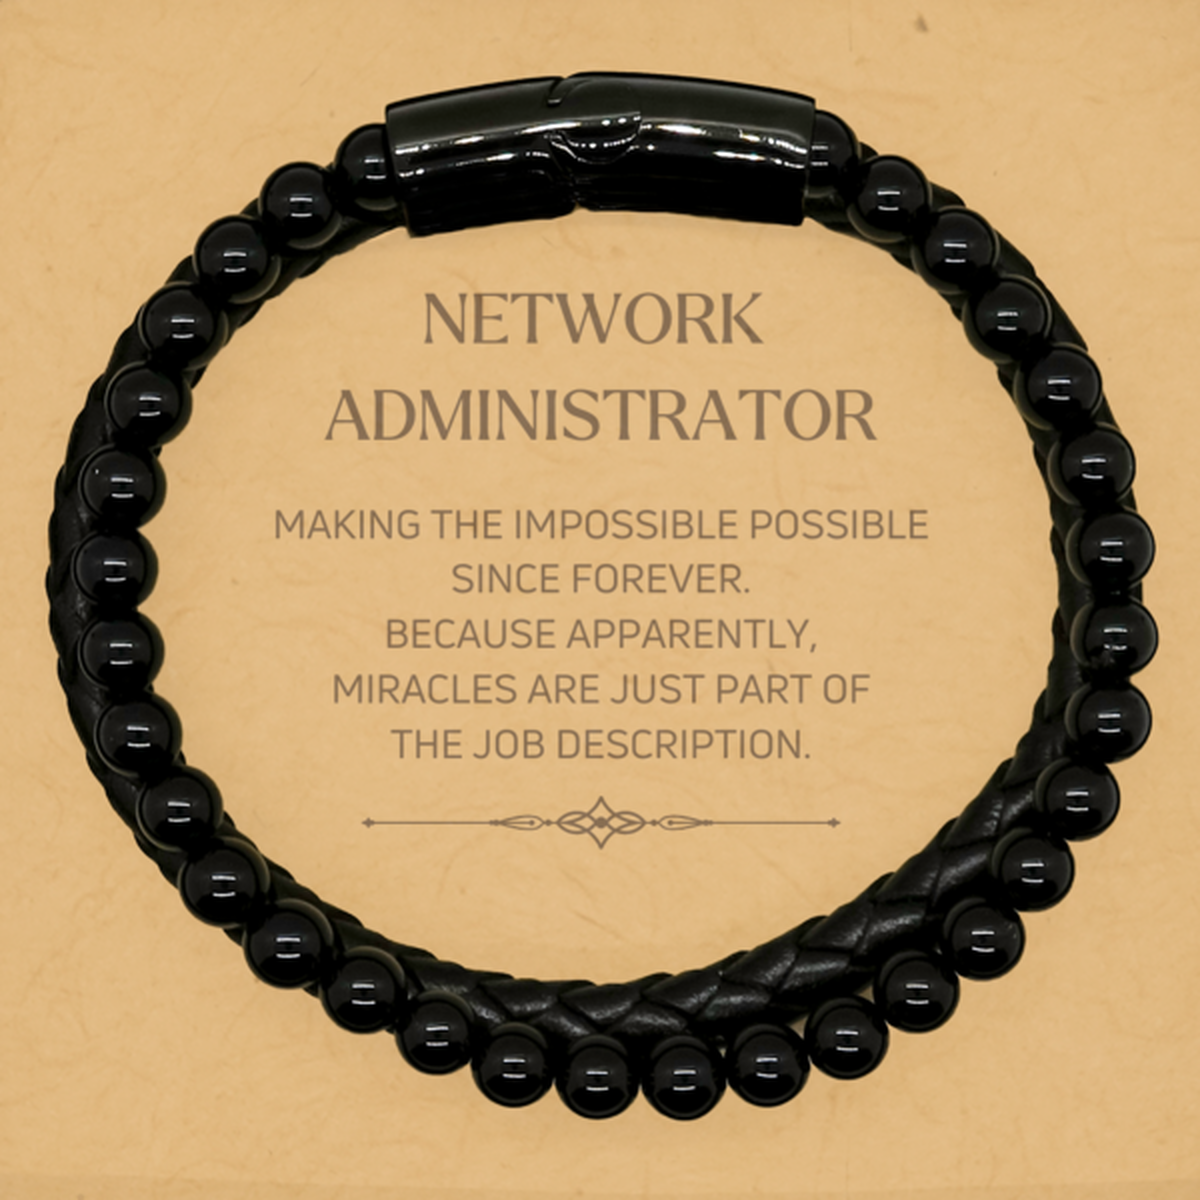 Funny Network Administrator Gifts, Miracles are just part of the job description, Inspirational Birthday Stone Leather Bracelets For Network Administrator, Men, Women, Coworkers, Friends, Boss